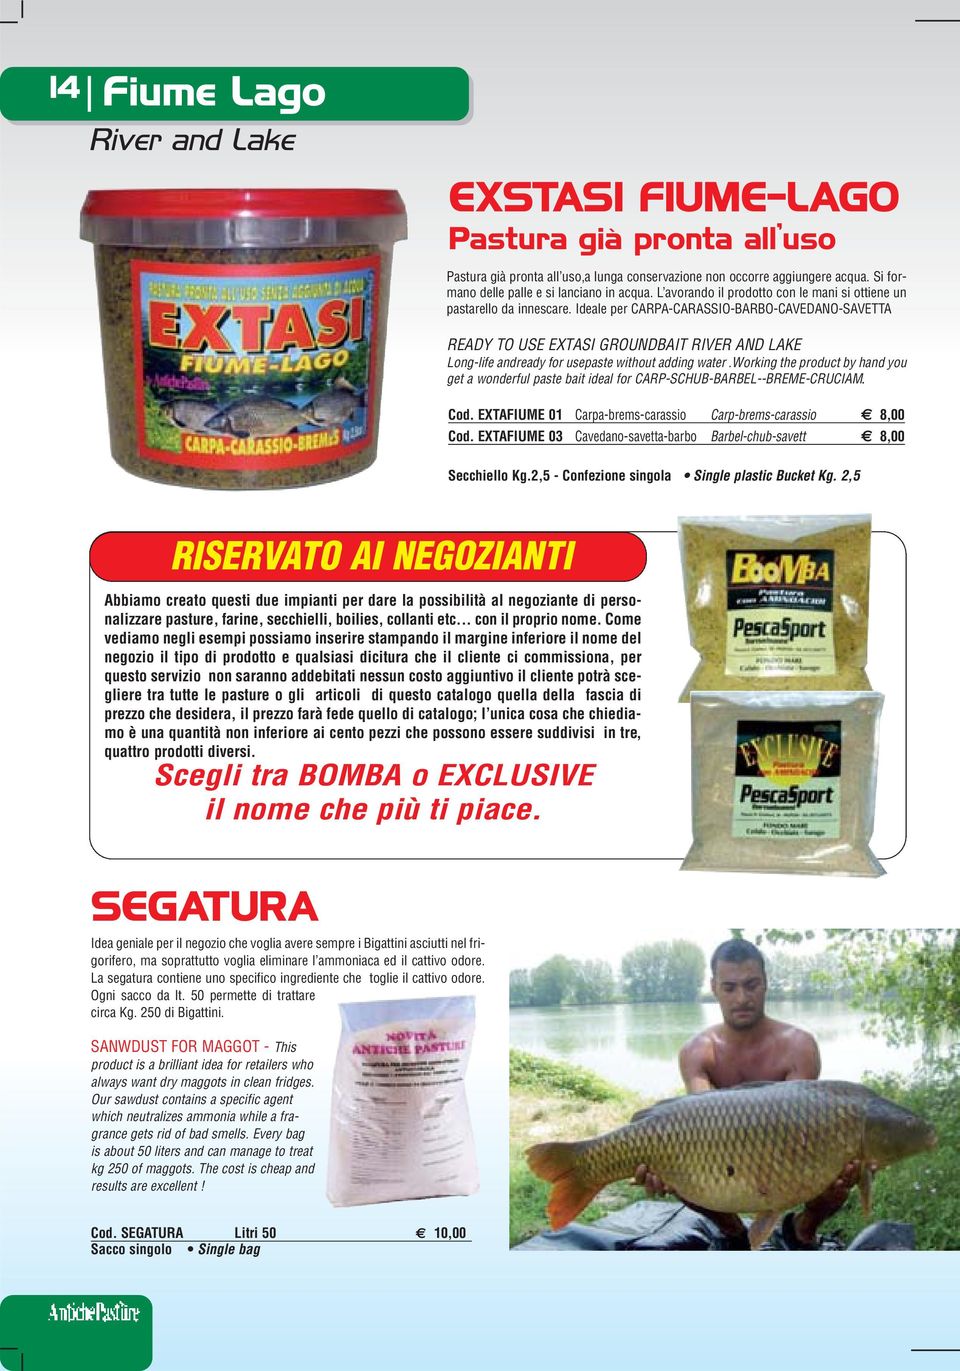 Ideale per CARPA-CARASSIO-BARBO-CAVEDANO-SAVETTA READY TO USE EXTASI GROUNDBAIT RIVER AND LAKE Long-life andready for usepaste without adding water.